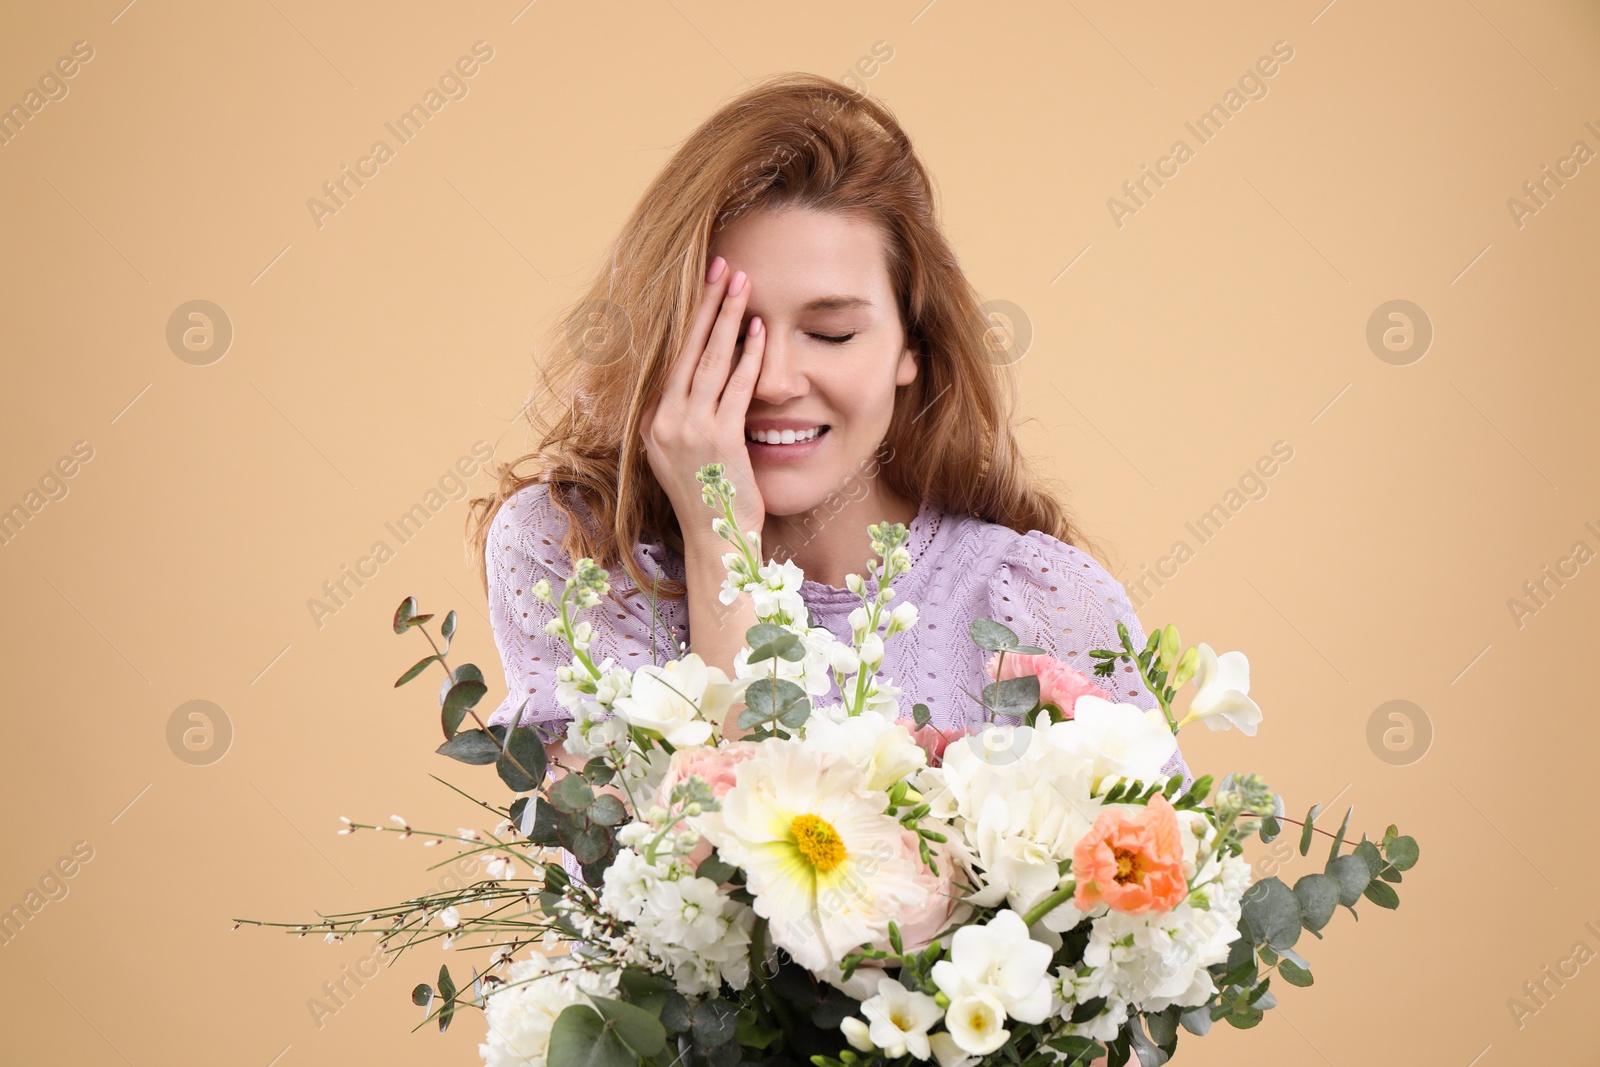 Photo of Beautiful woman with bouquet of flowers on beige background